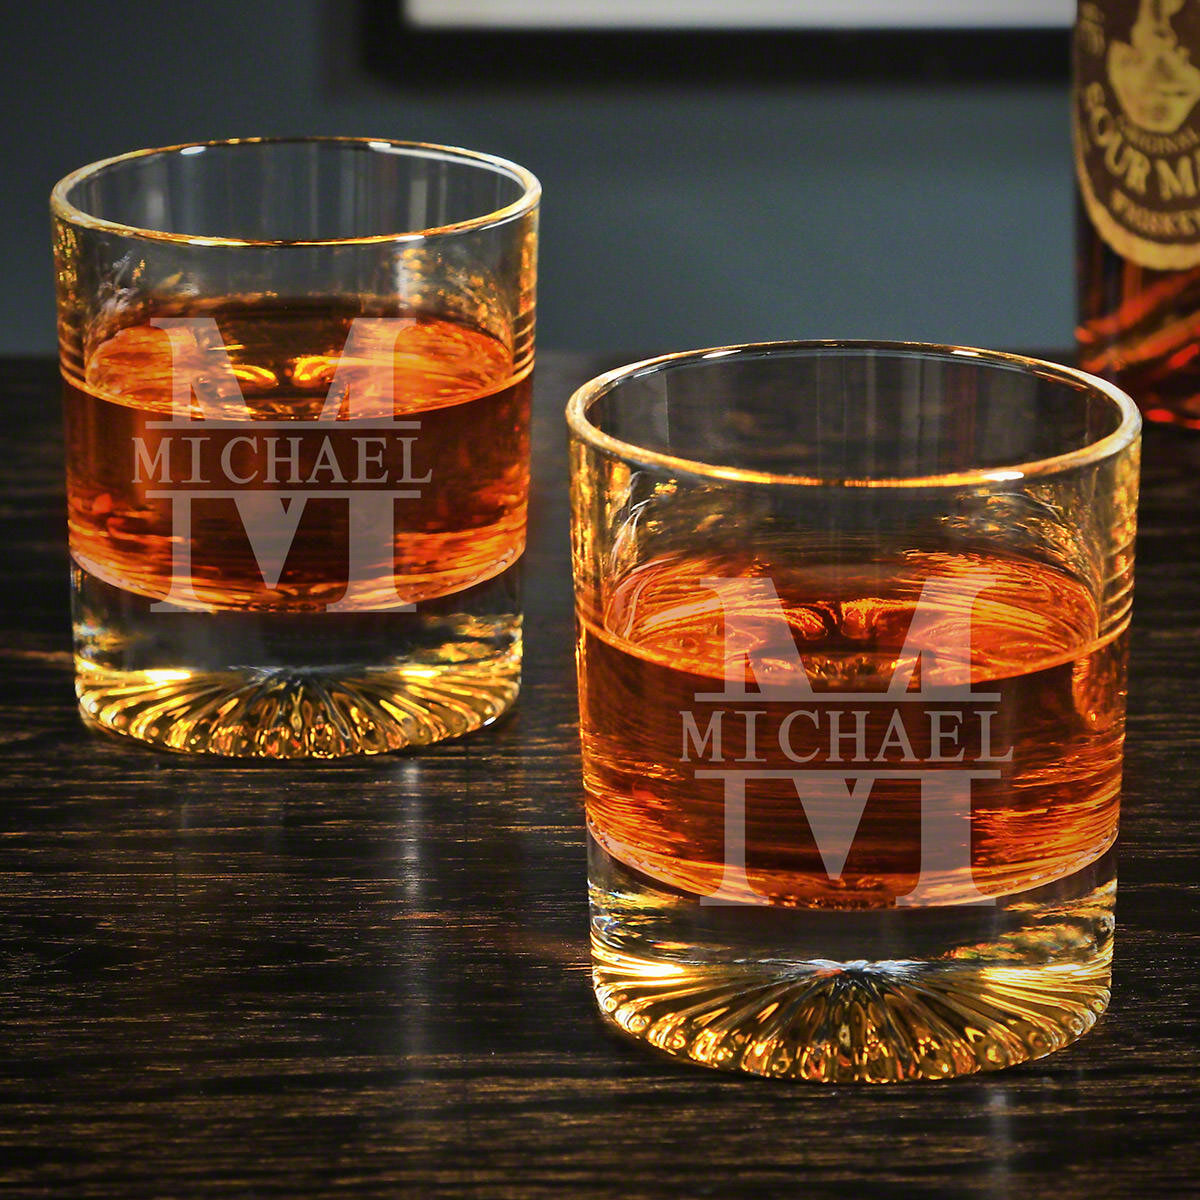 Viski Admiral Heavyweight Bourbon Glasses - Crystal Lowball Etched Cocktail  Glasses, Whiskey Glass Gift Set of 2 - 11 Ounces 